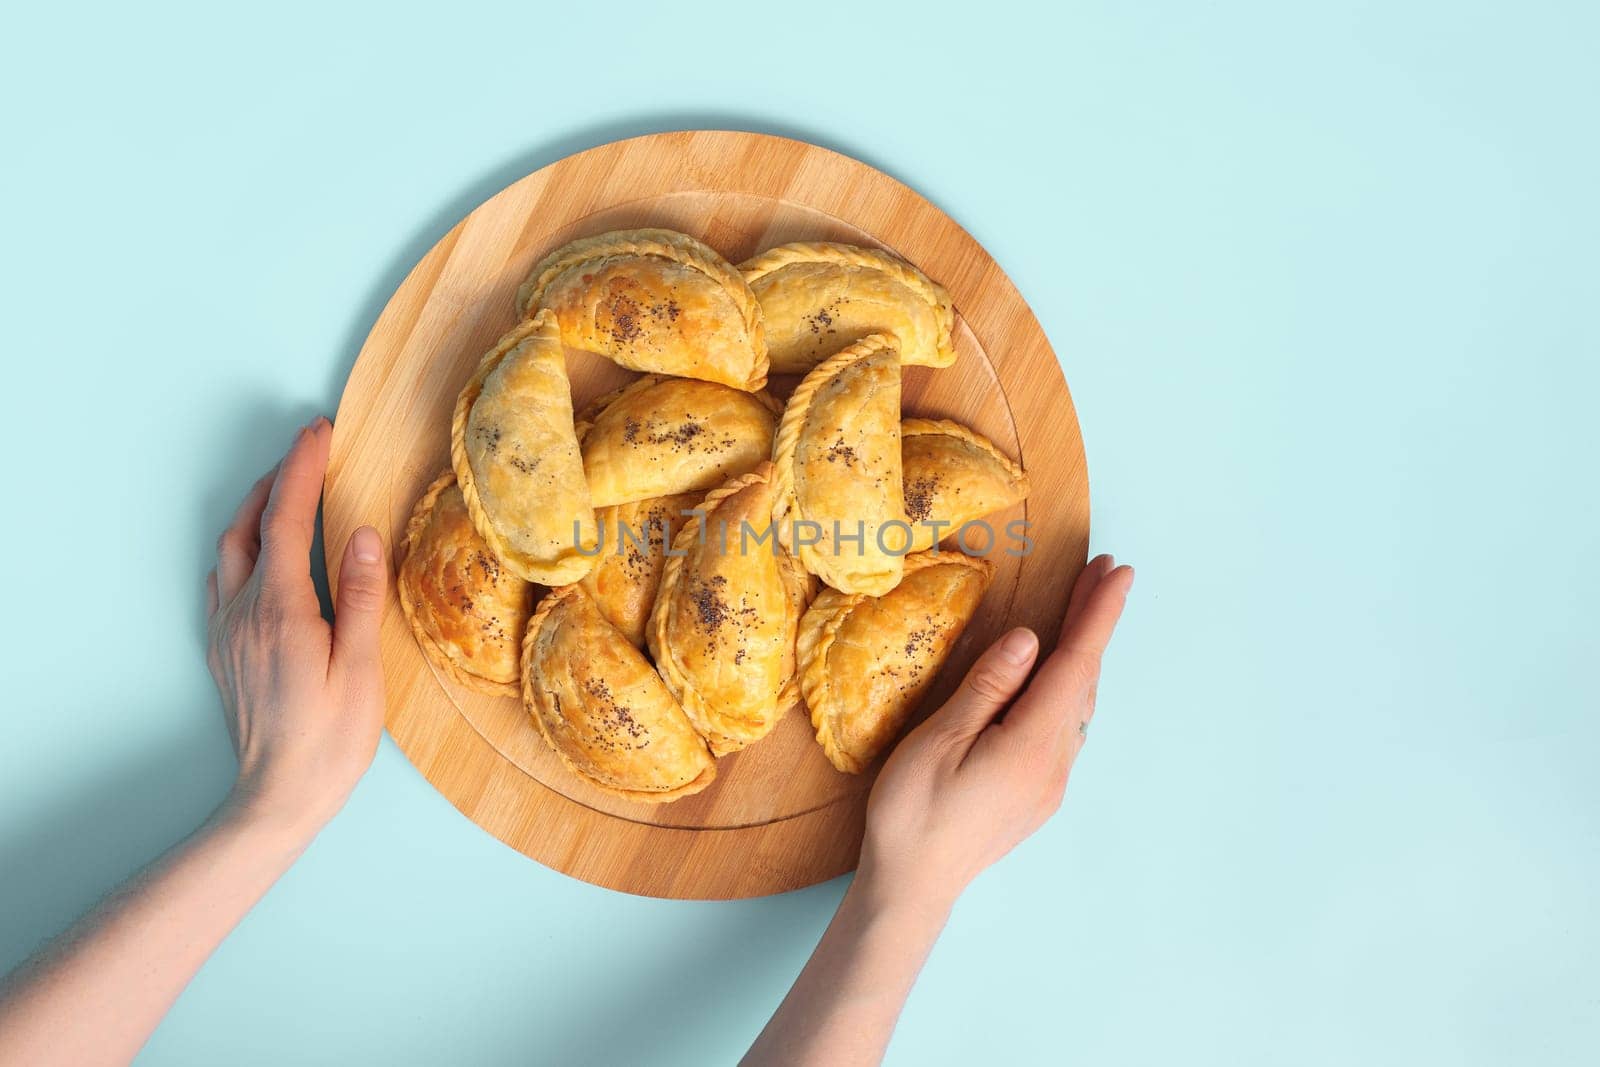 Top view on woman hands with wooden plate with baked samsa pies on blue background.